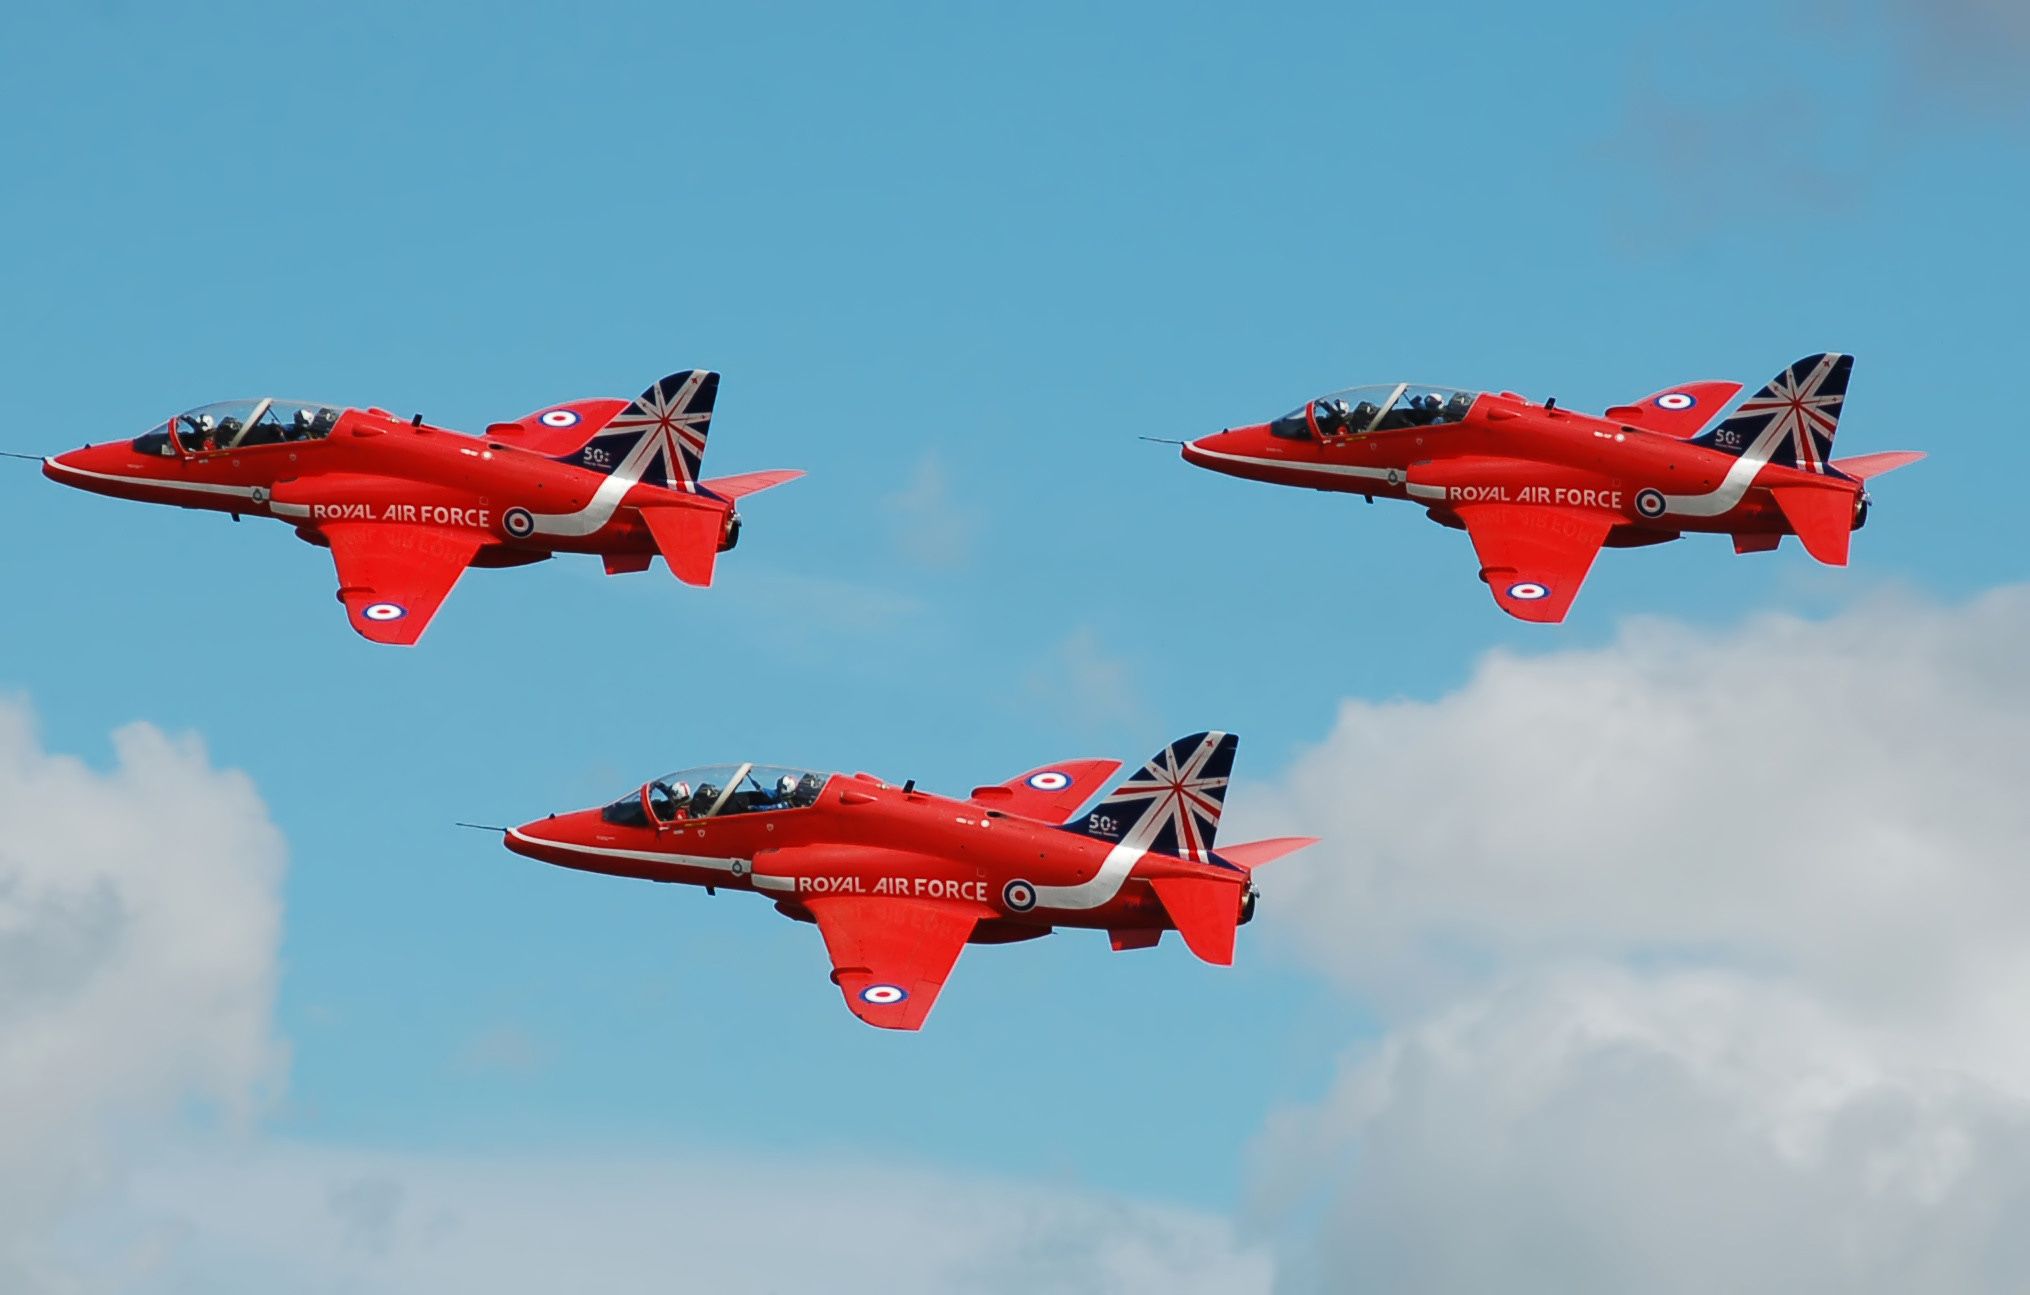 The RAF Red Arrows fly in the sky.